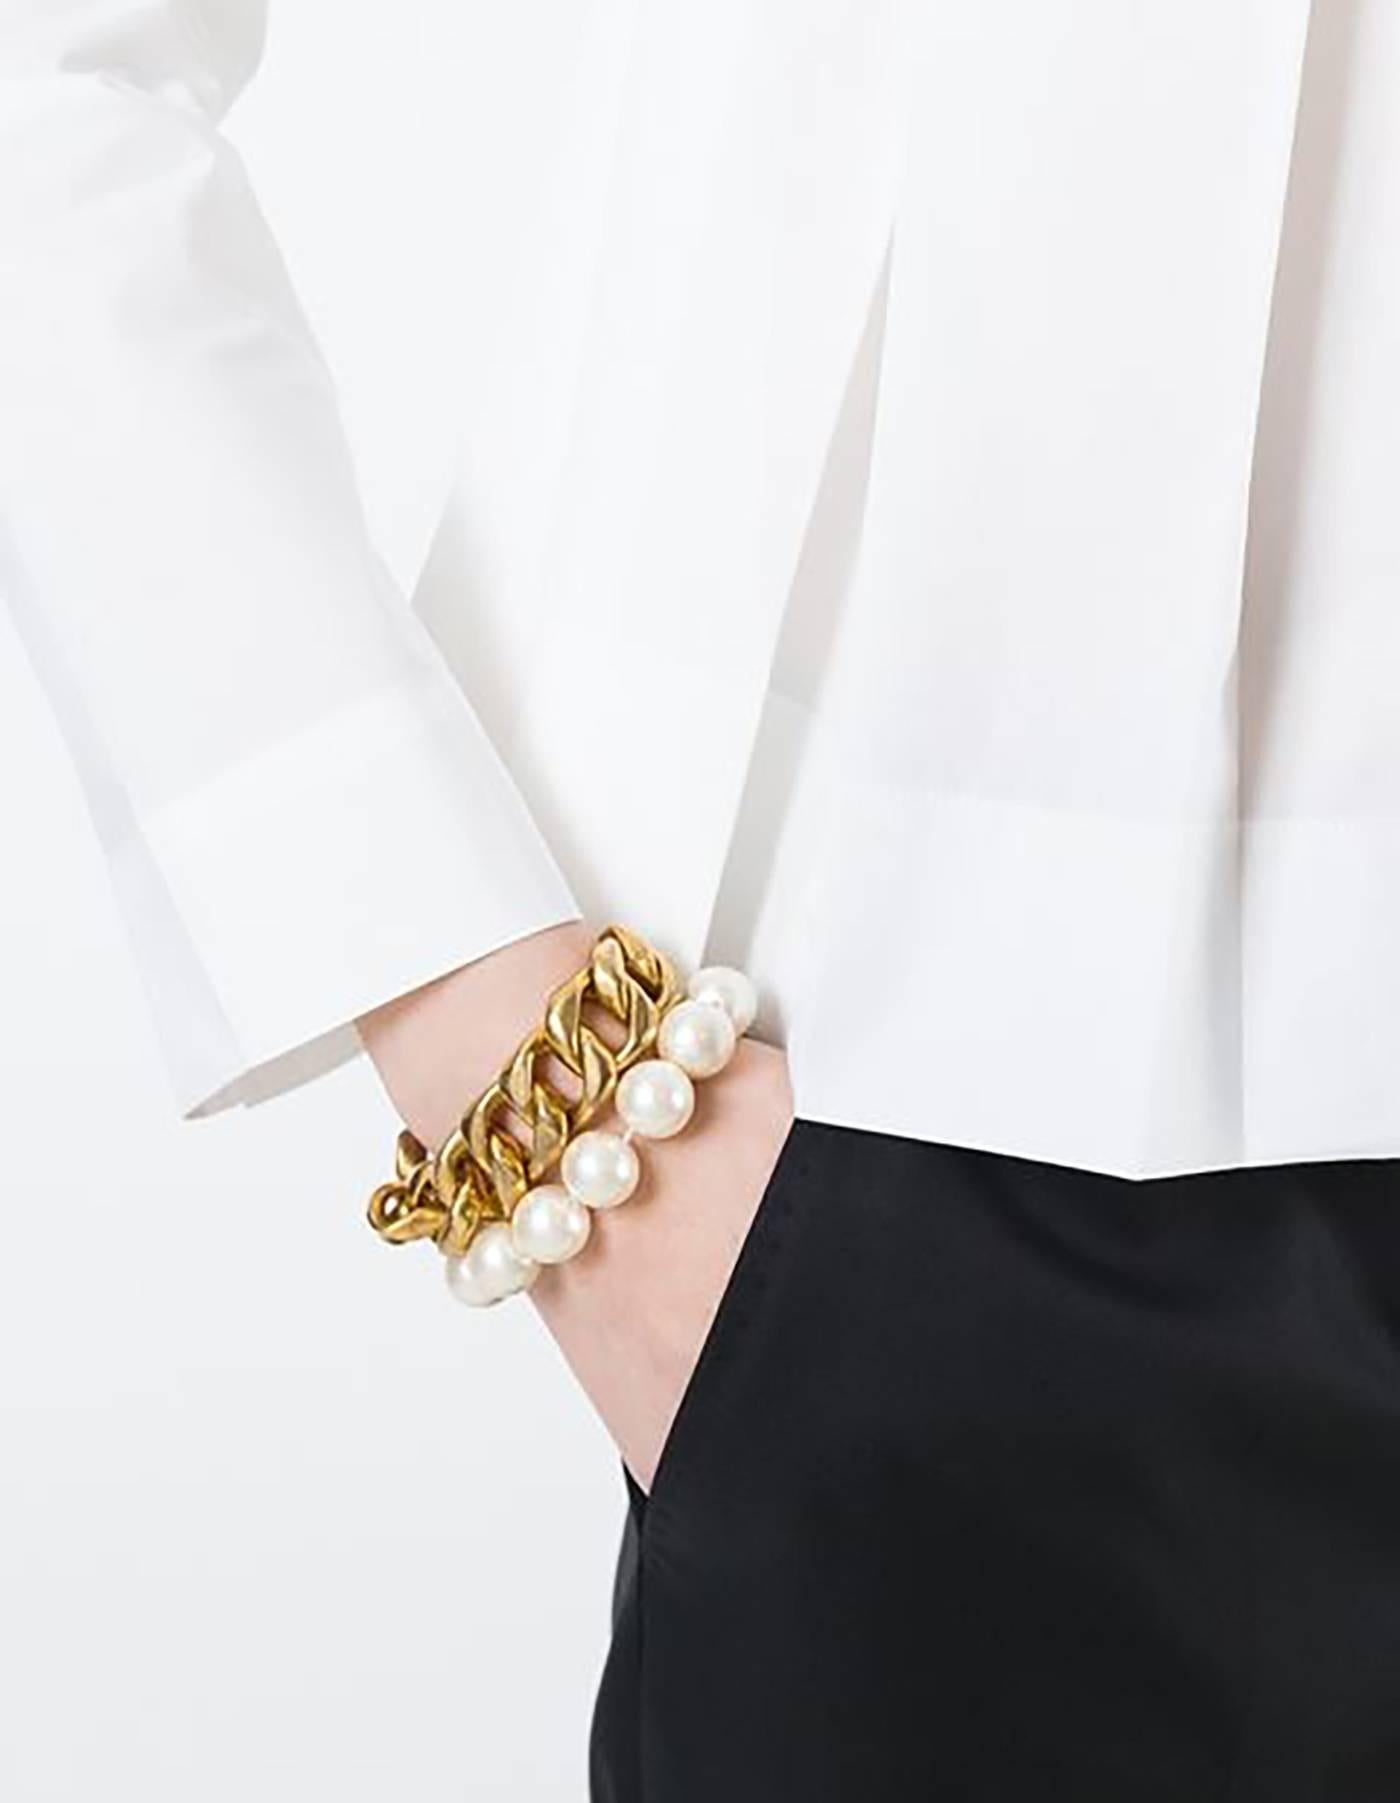 Chanel Pearl & Bronze Chain Link Bracelet
Made in: France
Year of Production: 1980s
Color: Goldtone and ivory
Materials: Metal and faux pearl
Closure: Antique push lever closure
Stamp: Chanel CC Made in France
Overall Condition: Excellent